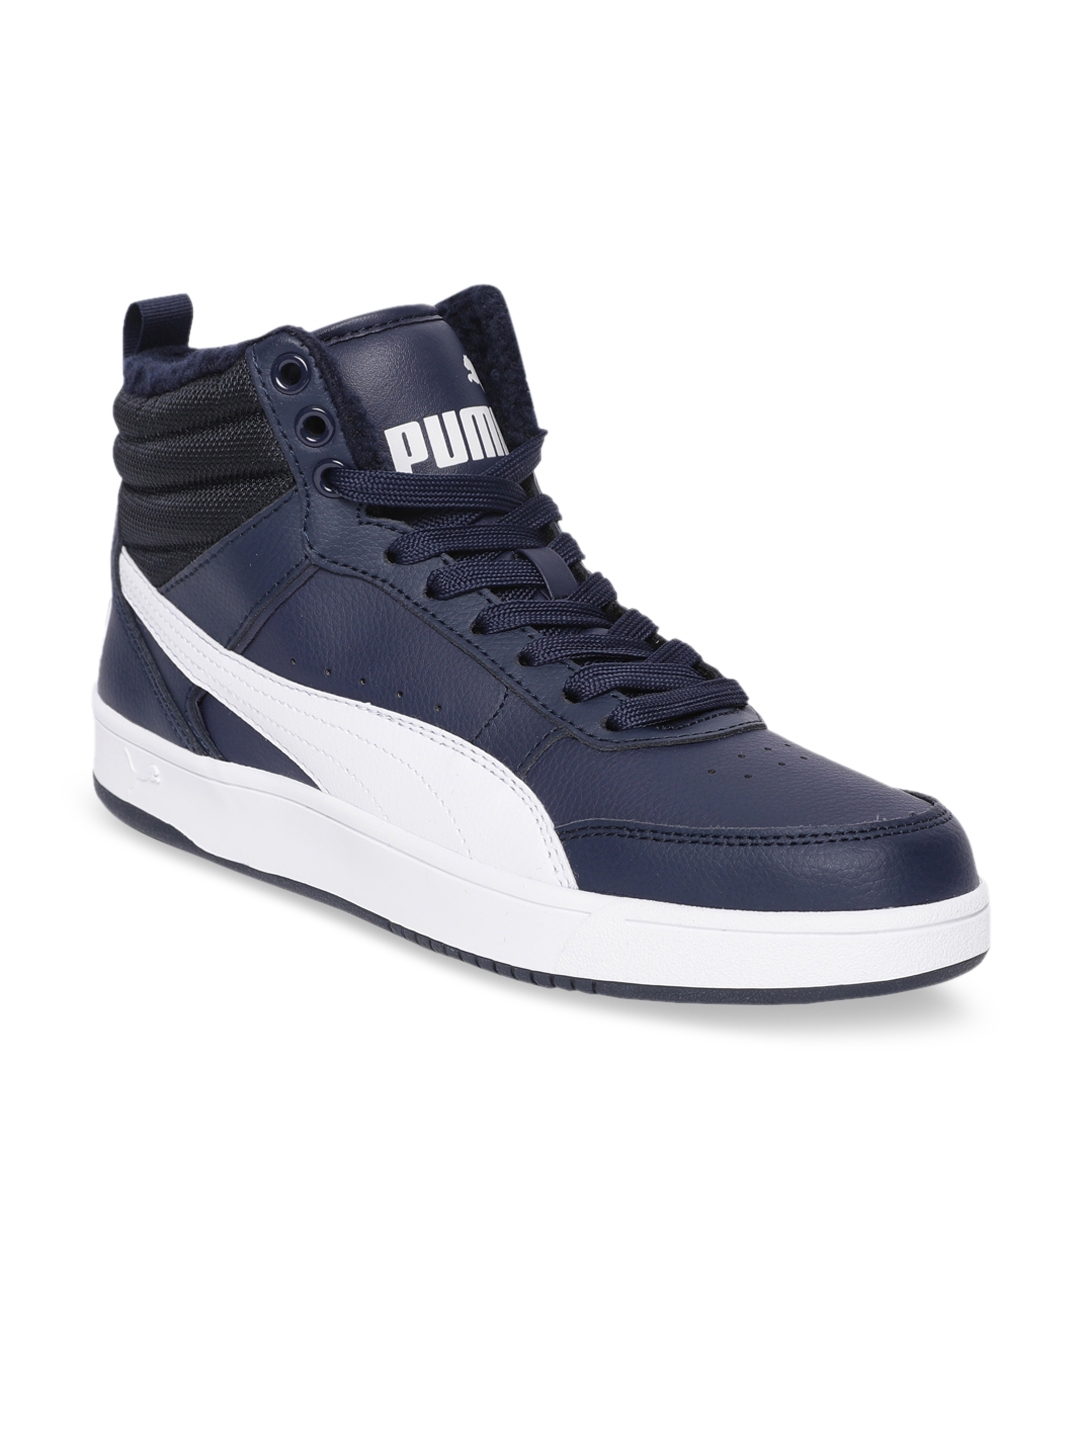 Buy Puma Men Navy Blue & White Colourblocked Leather Mid Top Leather ...